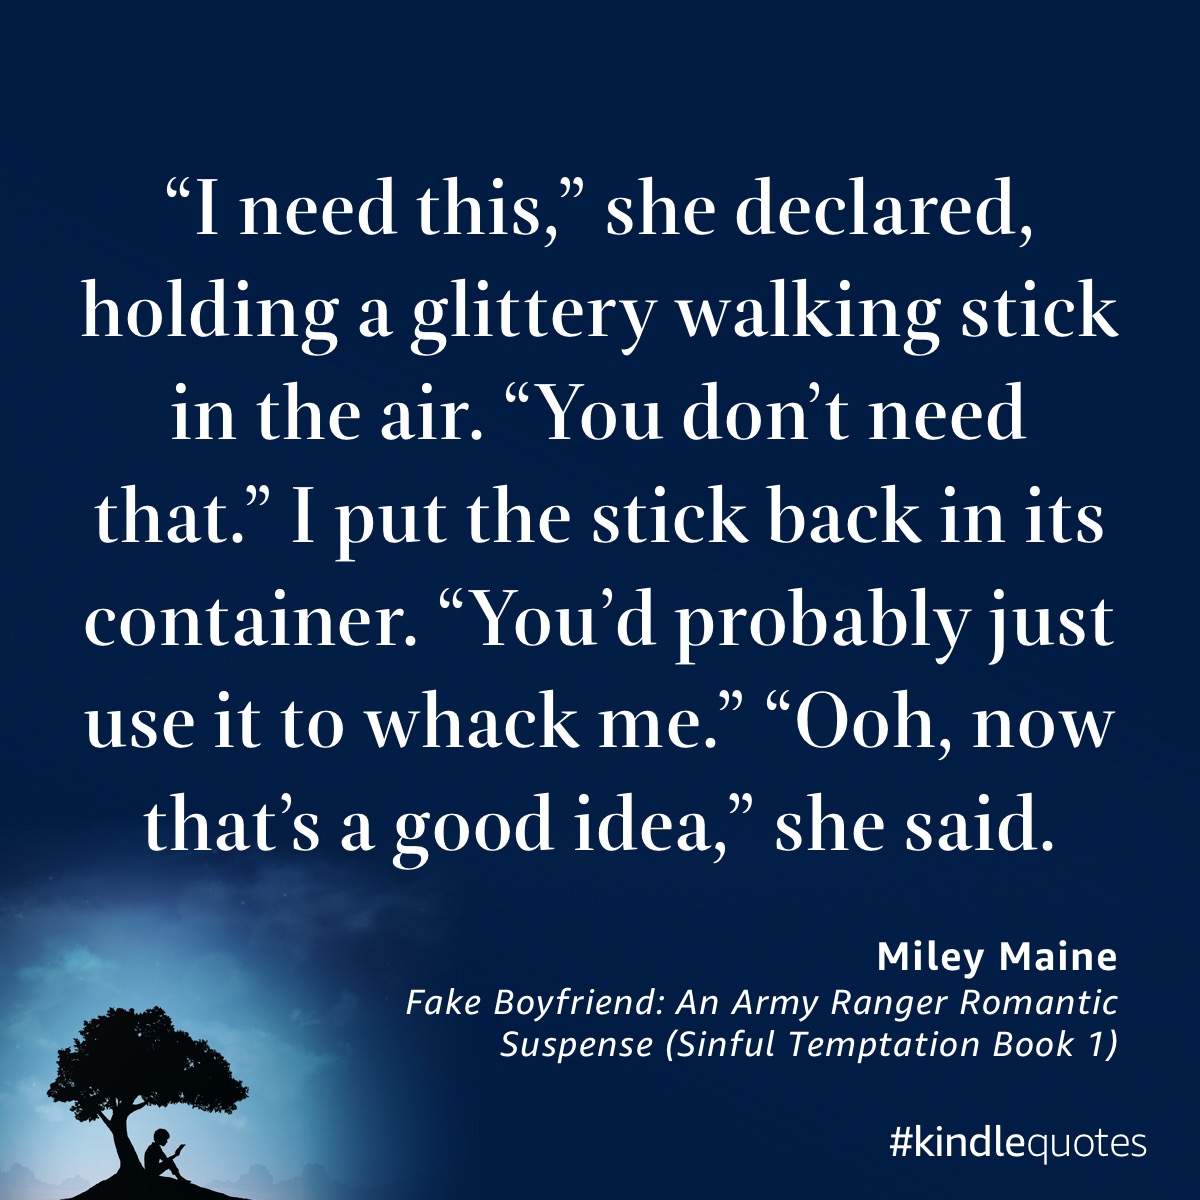 Book quote Miley Maine